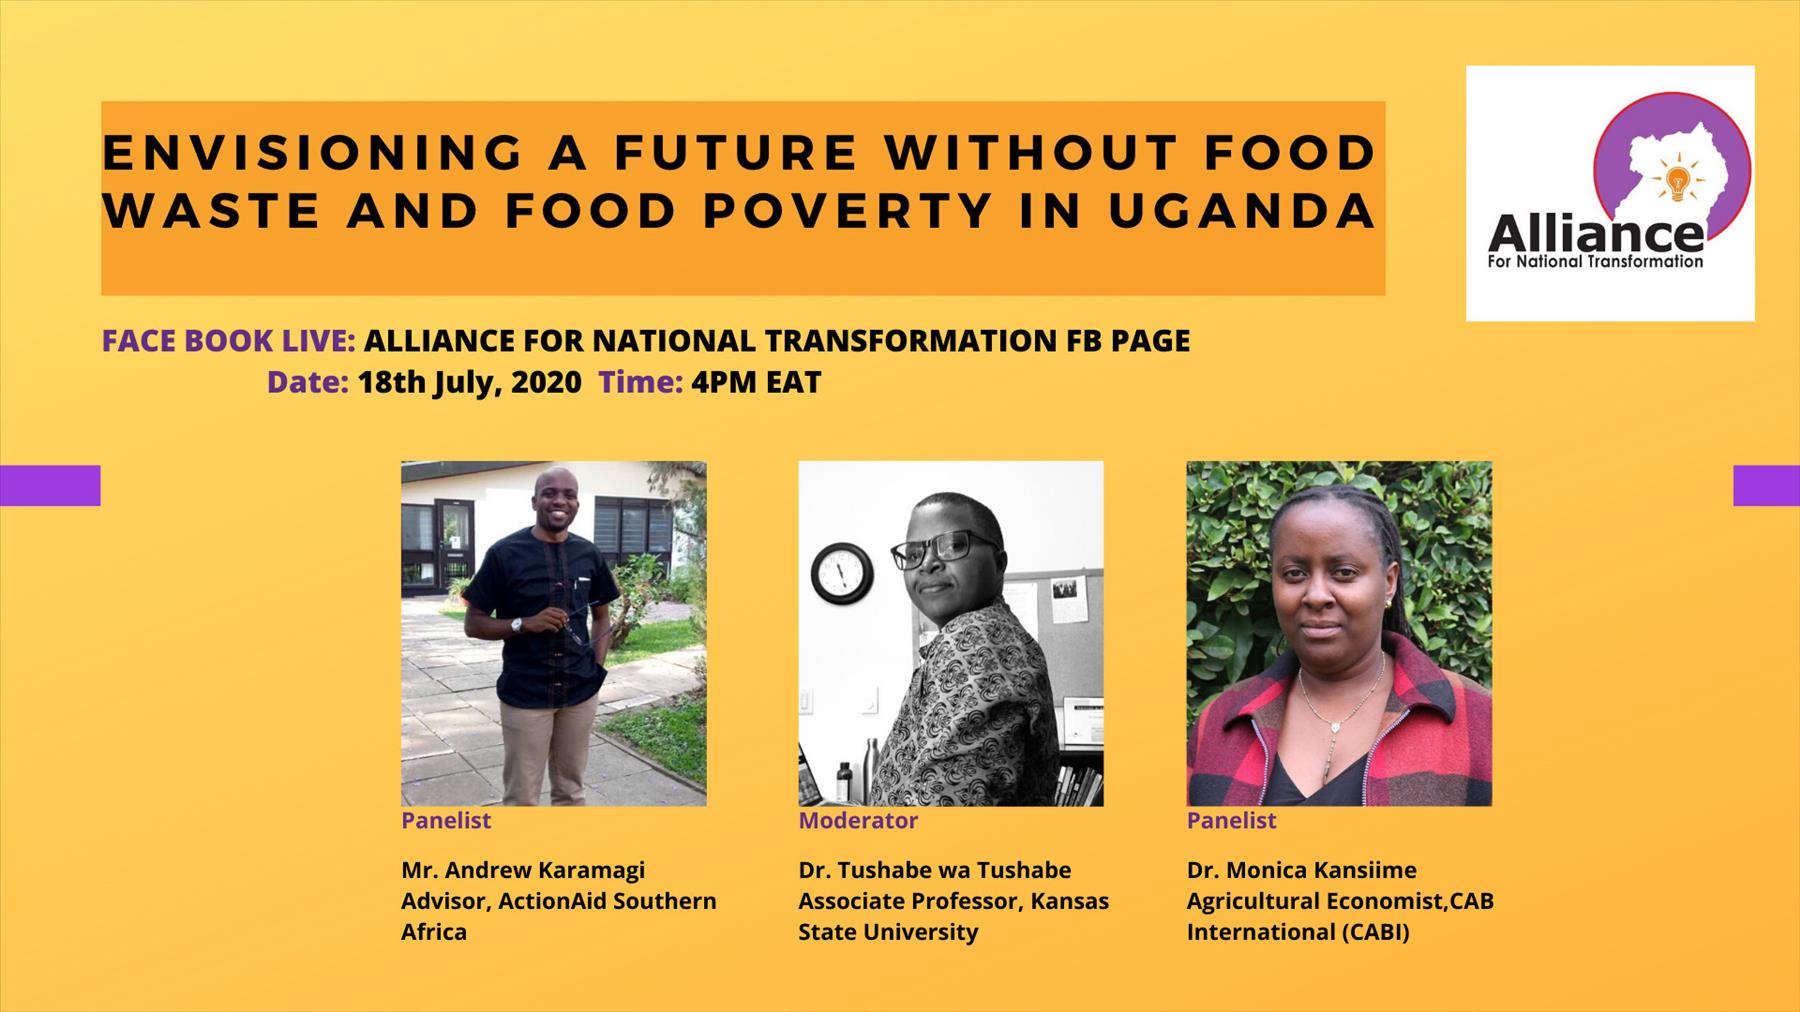 Envisioning a future without food poverty in Uganda